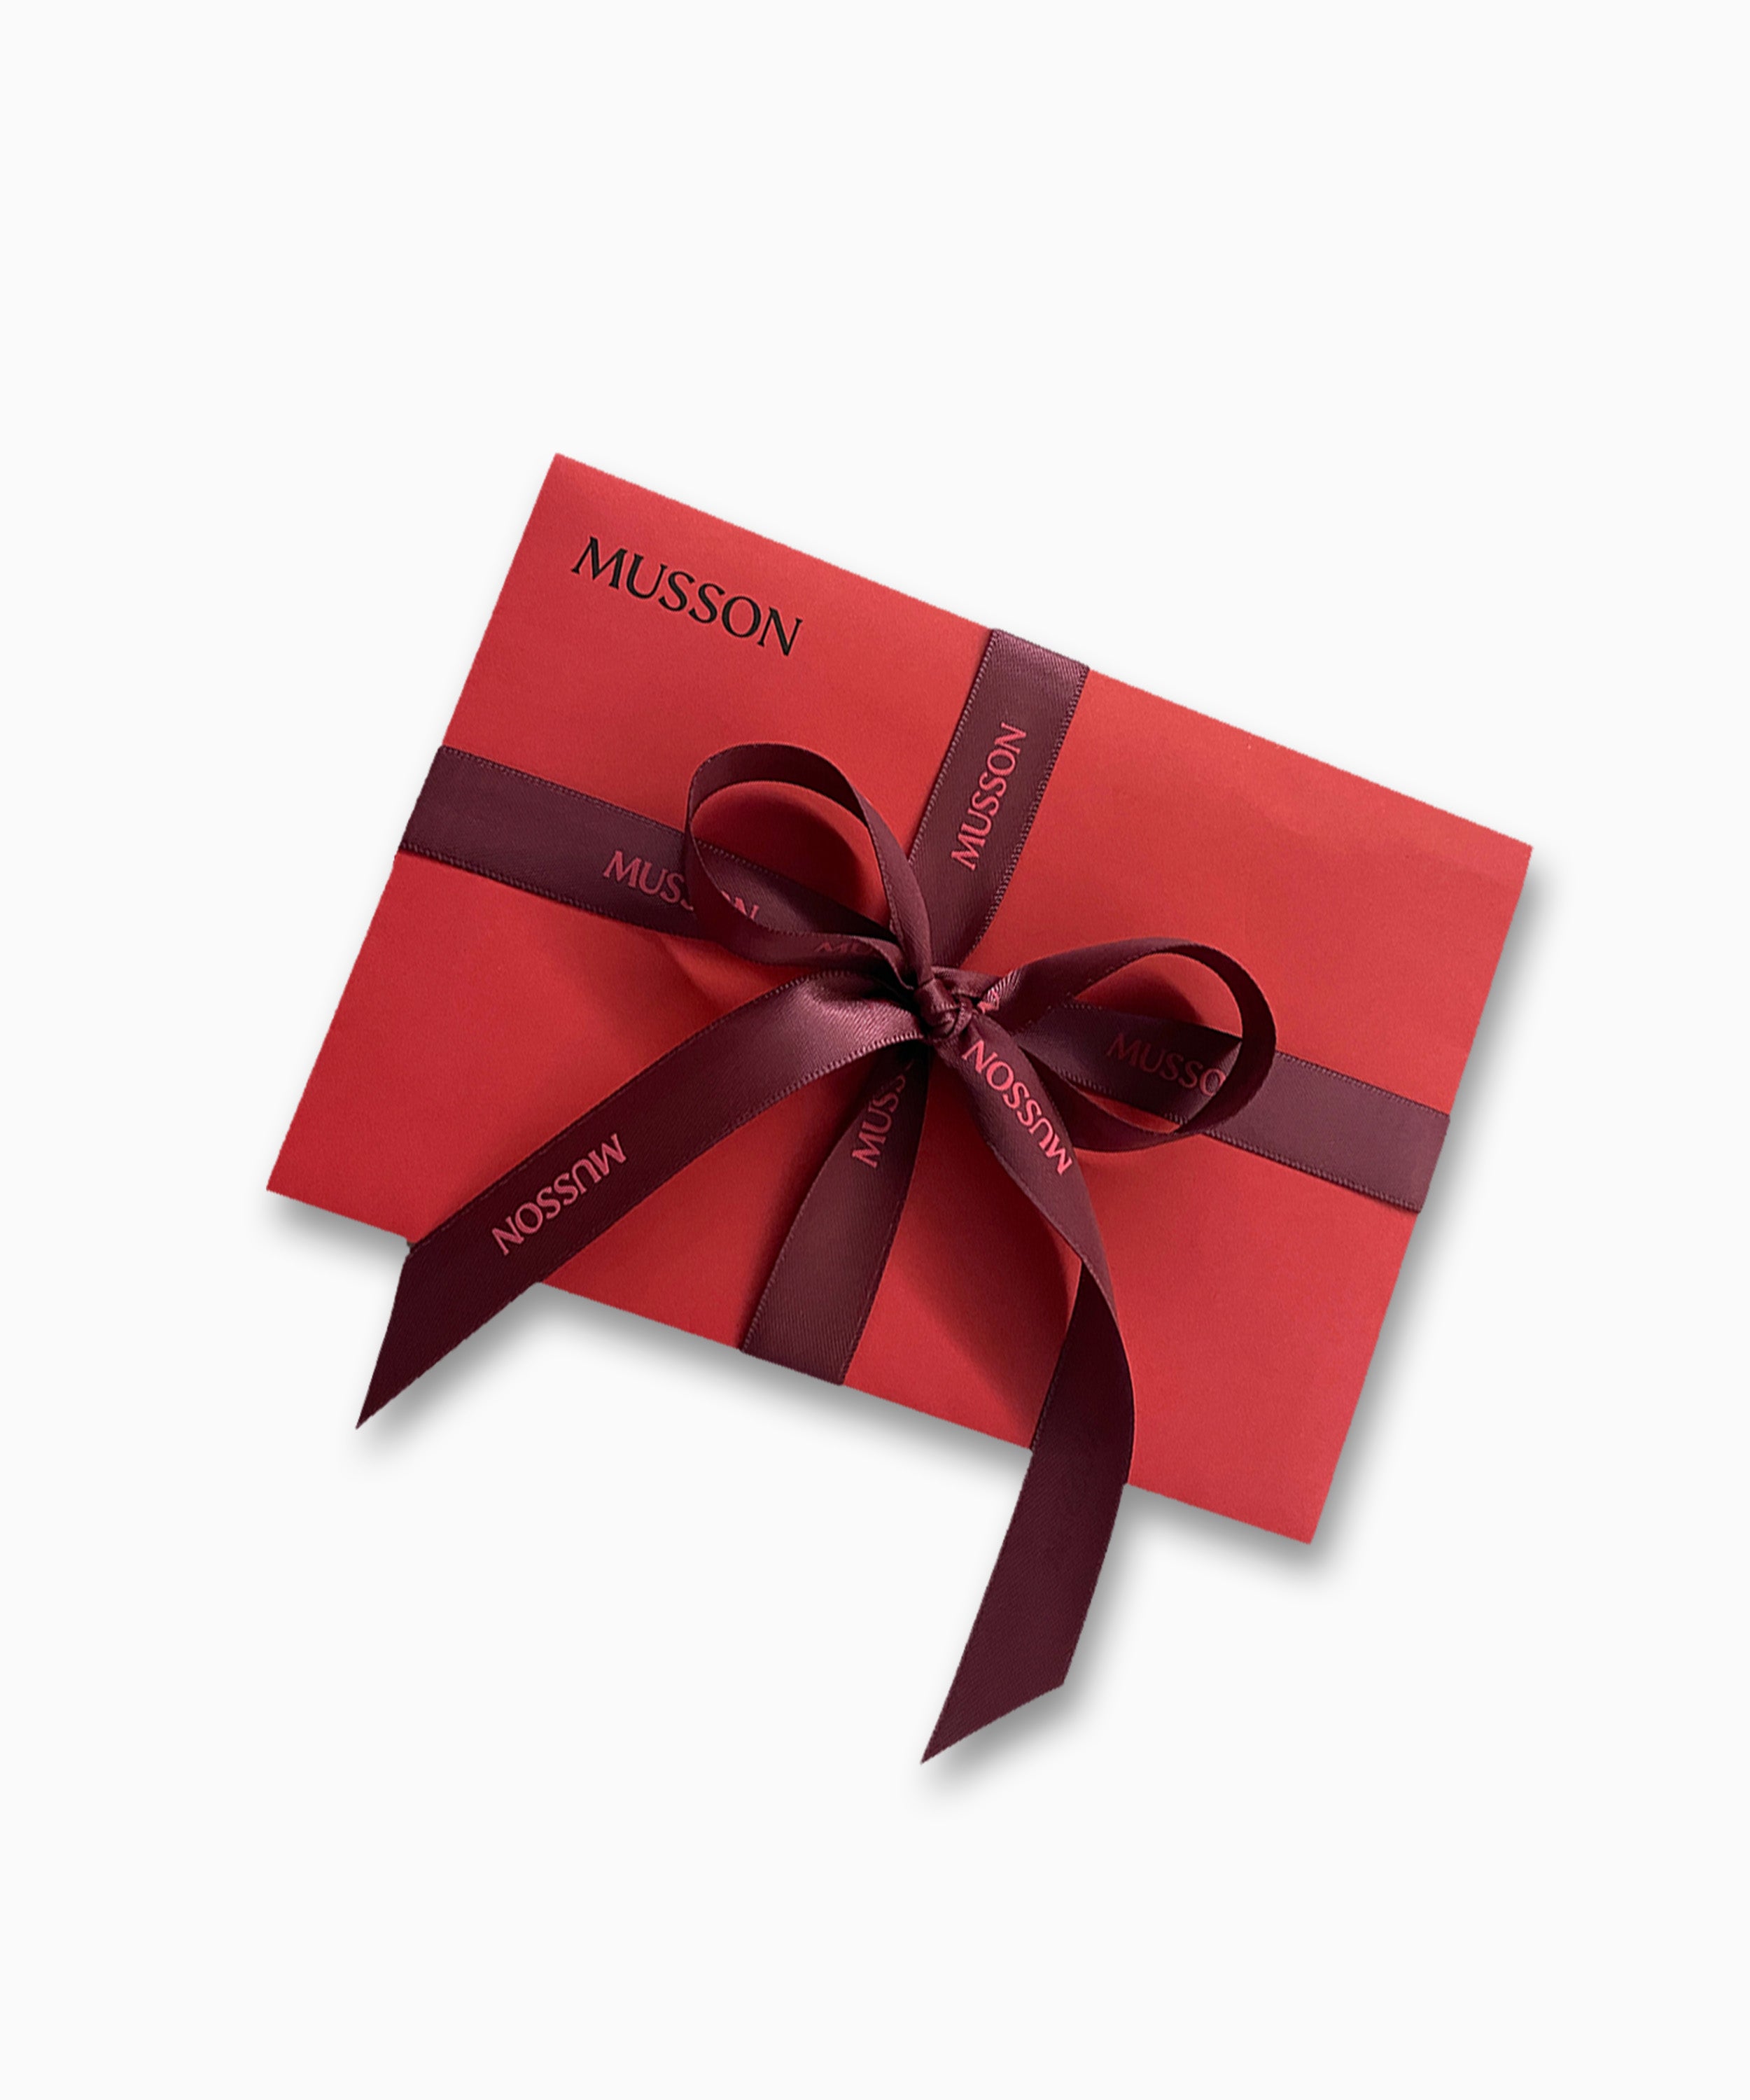 Musson Gift Certificate